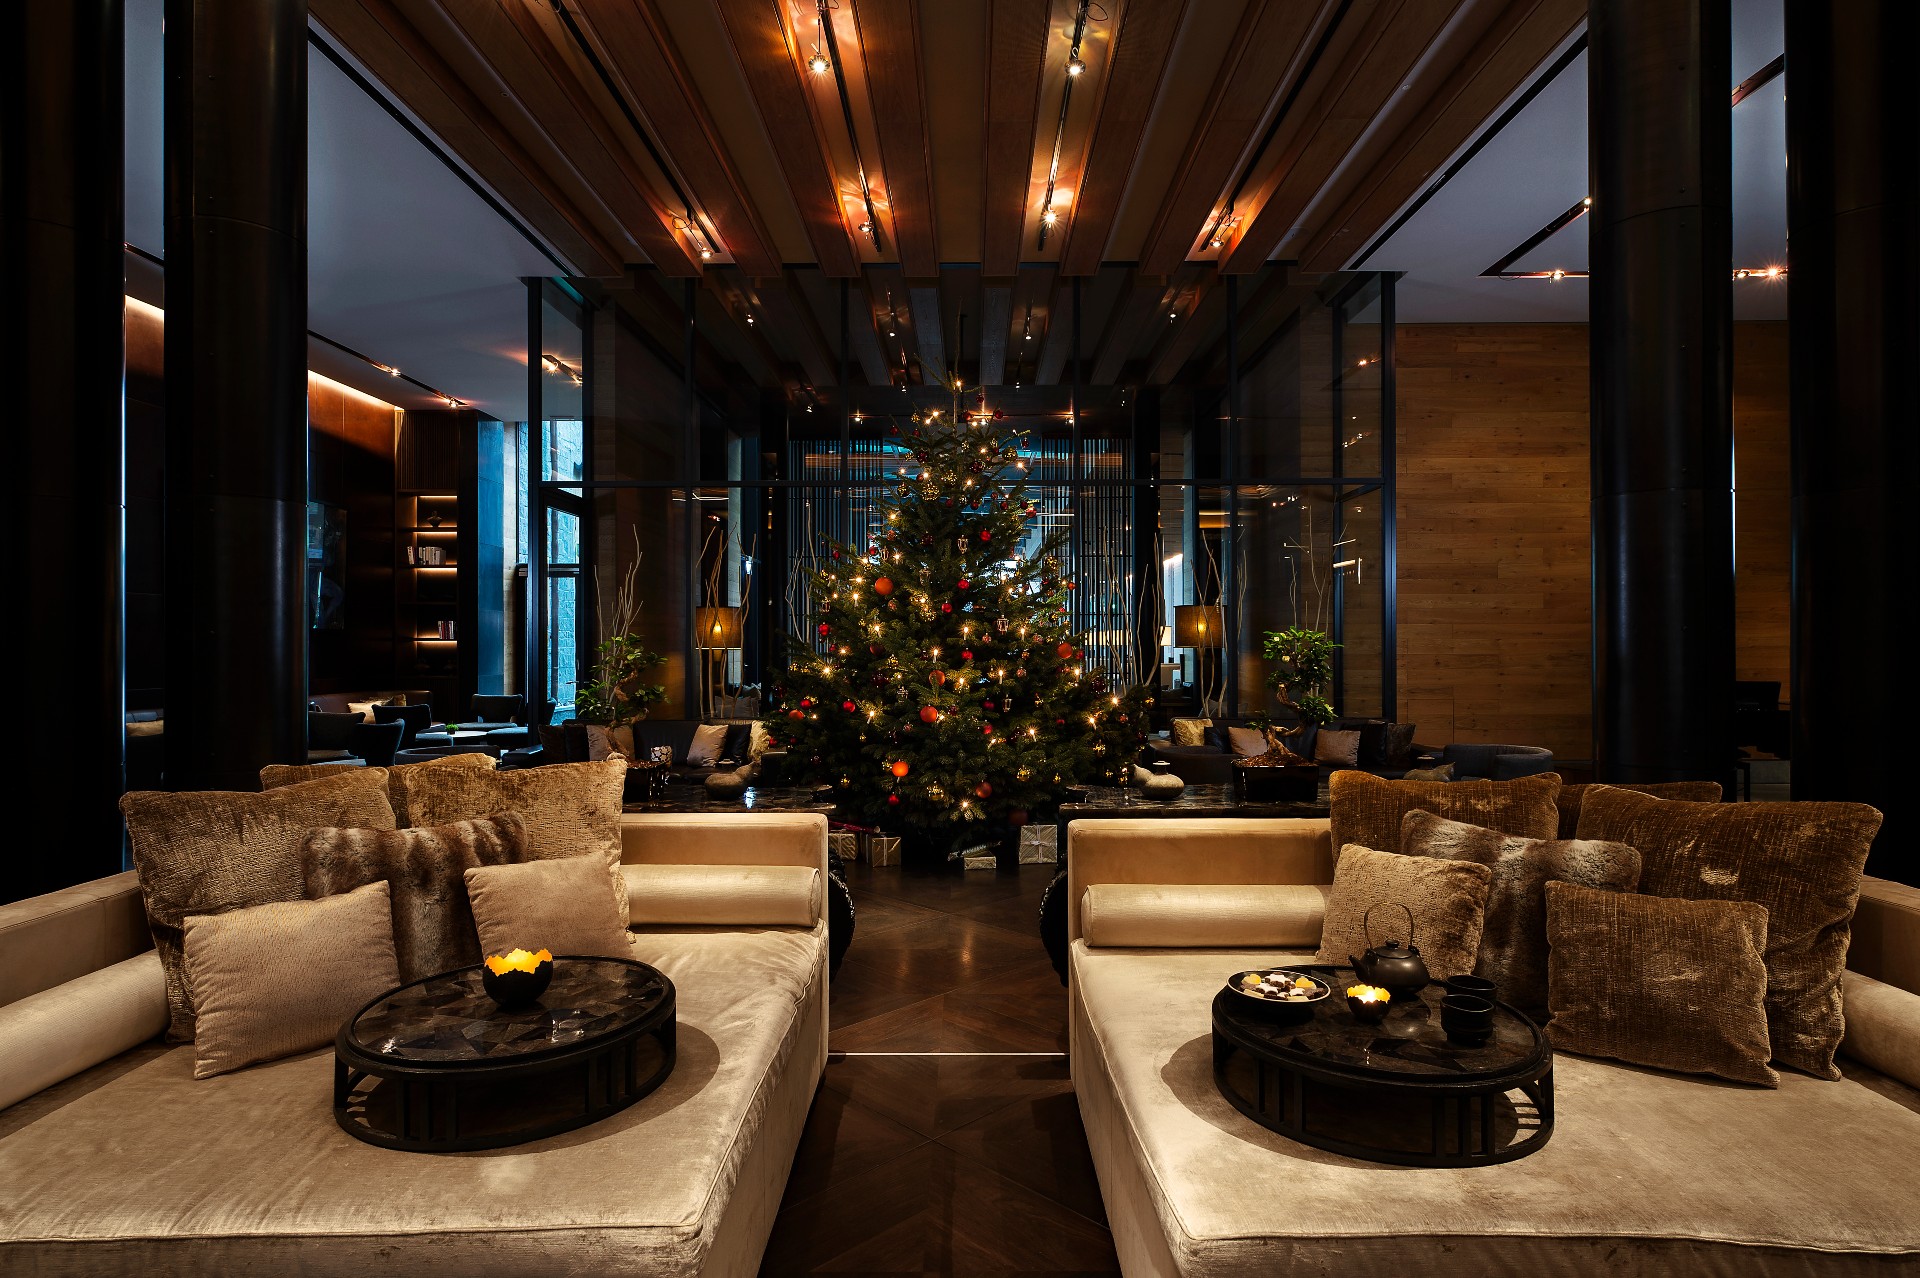 A Room With A Christmas Tree And Couches